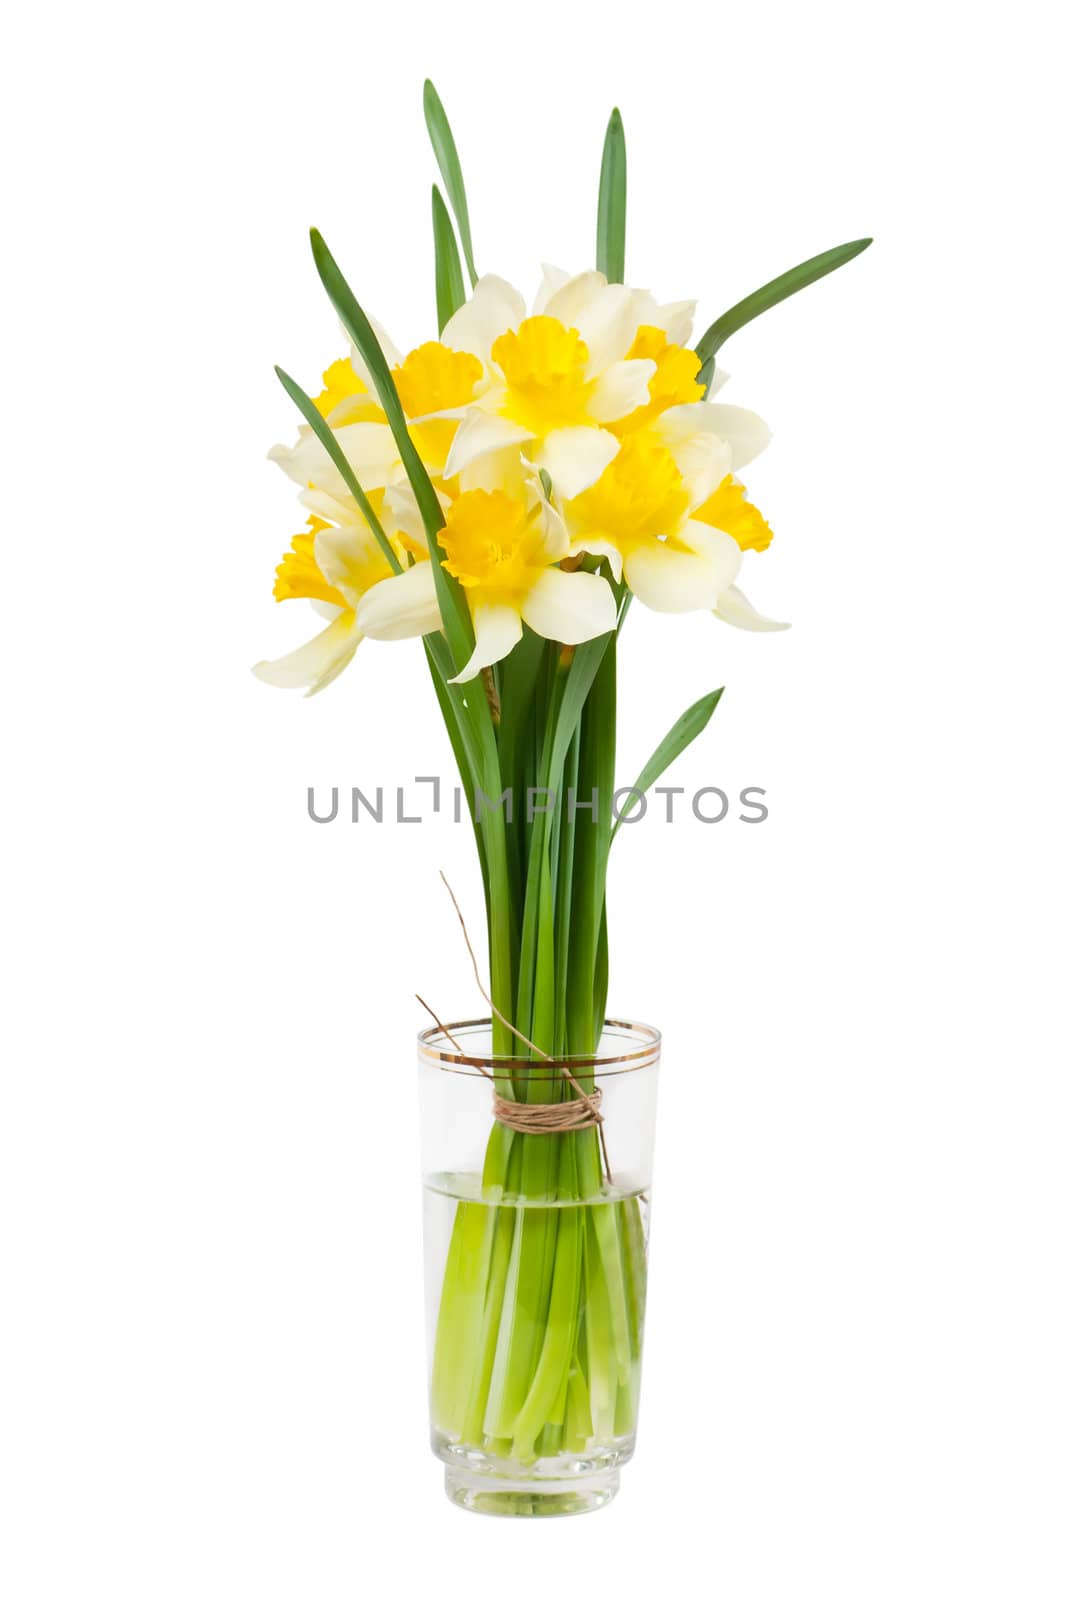 A bouquet of narcissuses in a glass with water isolated over white